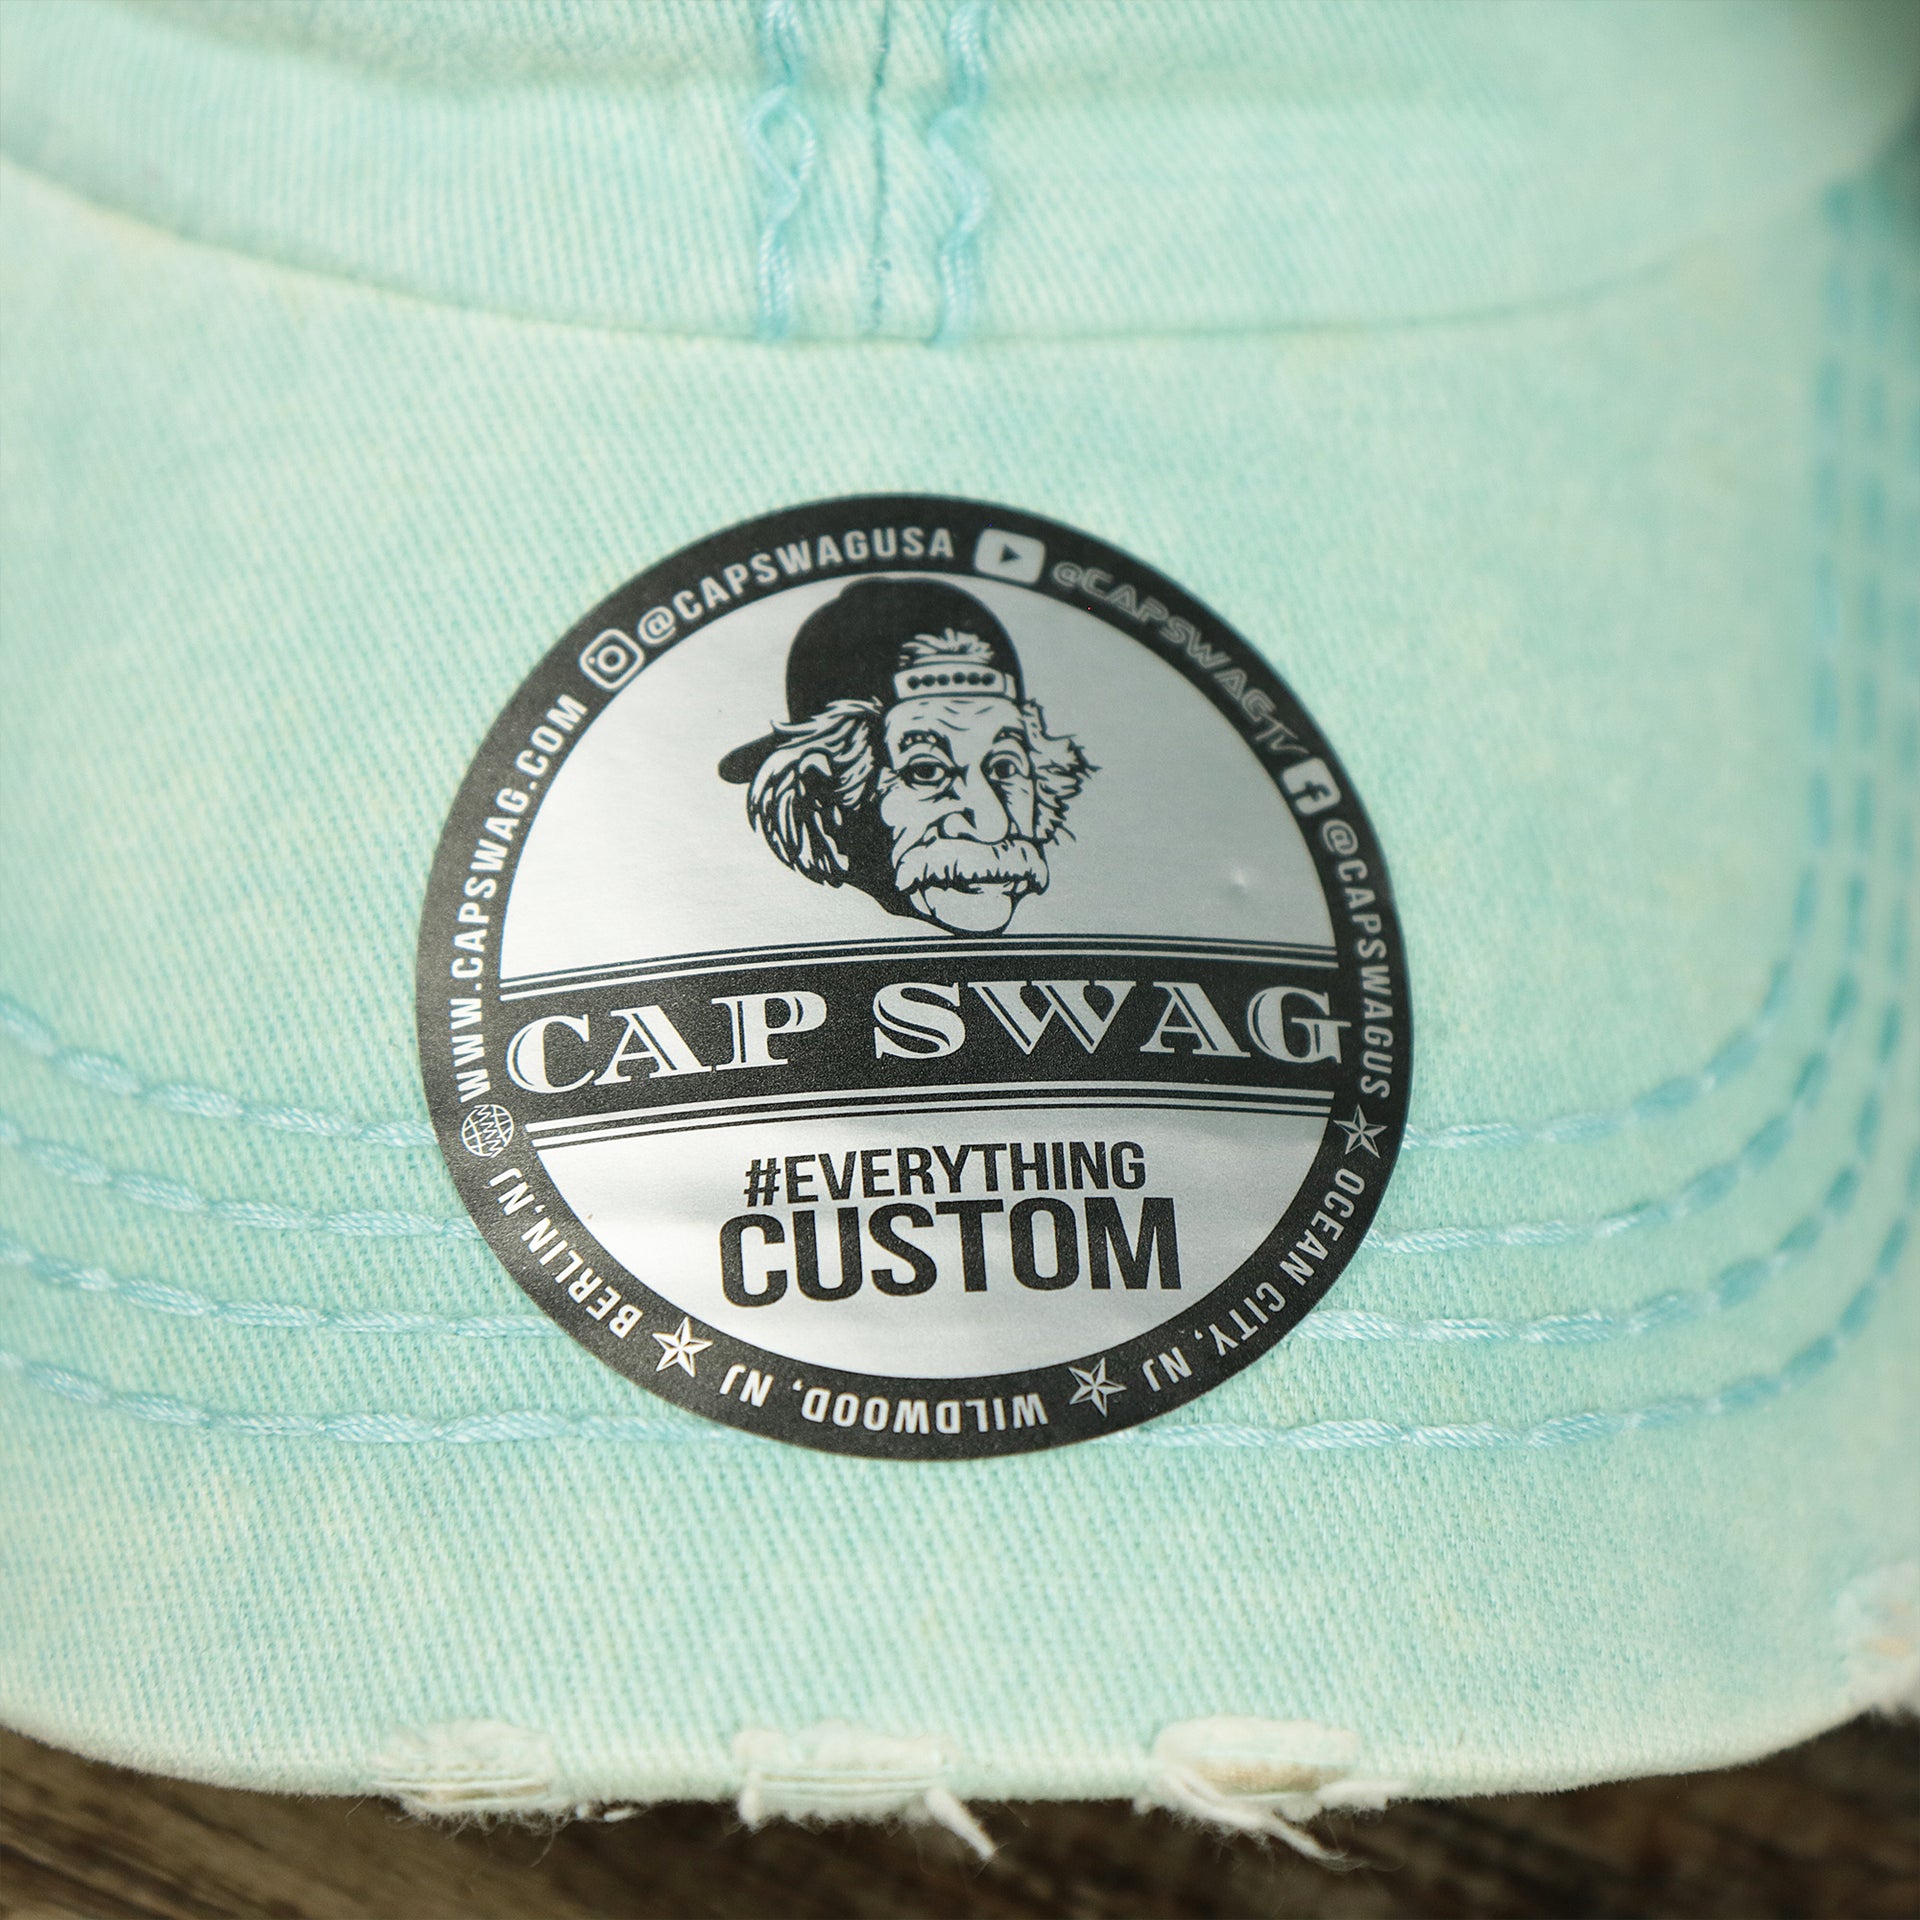 The Capswag Sticker on the Washed Pigment Blank Distressed Baseball Hat | Washed Mint Dad Hat